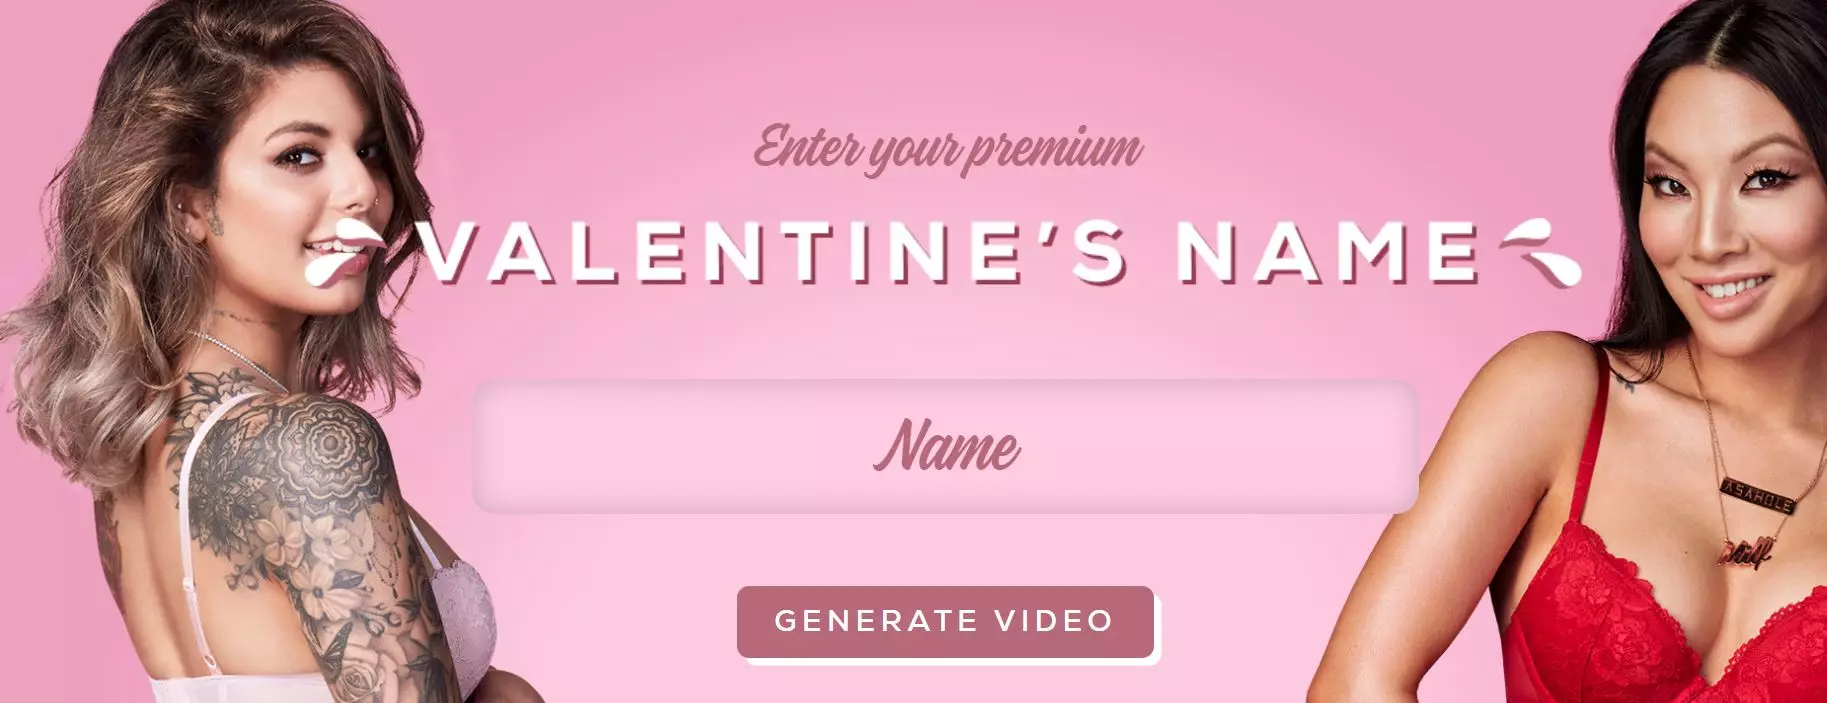 All you need to do is choose a Pornhub personality to deliver your message and enter your Valentine's name.